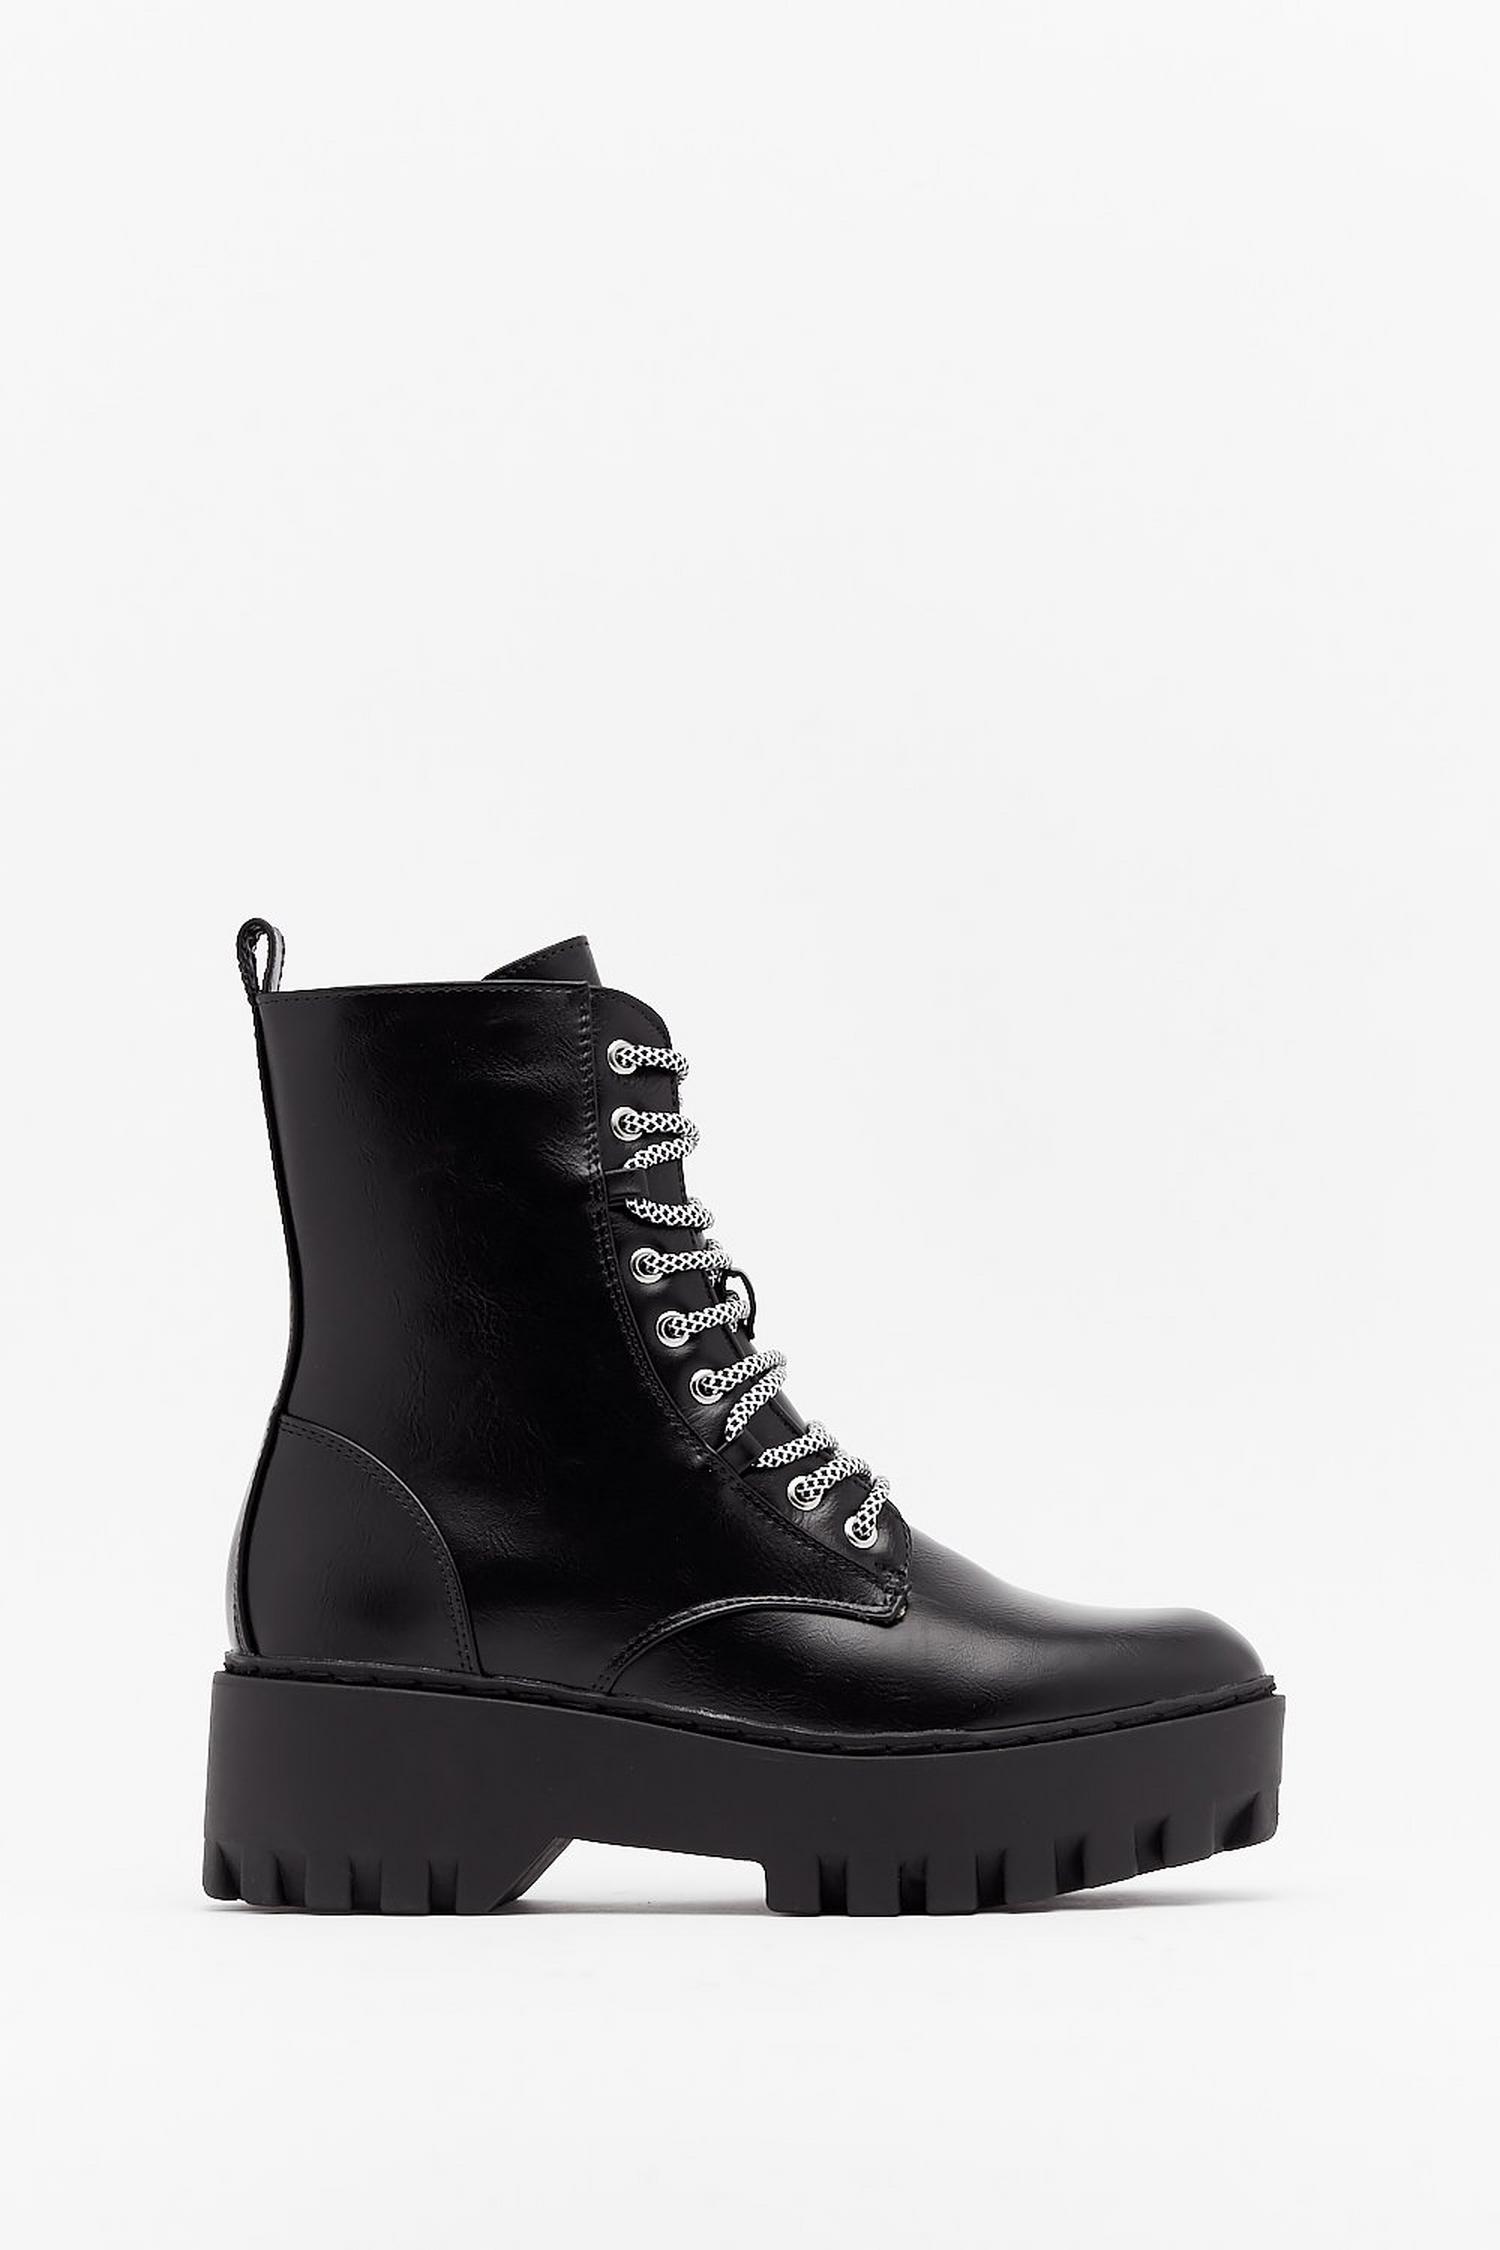 She's Lace-Up to Somethin' Cleated Platform Boots | Nasty Gal